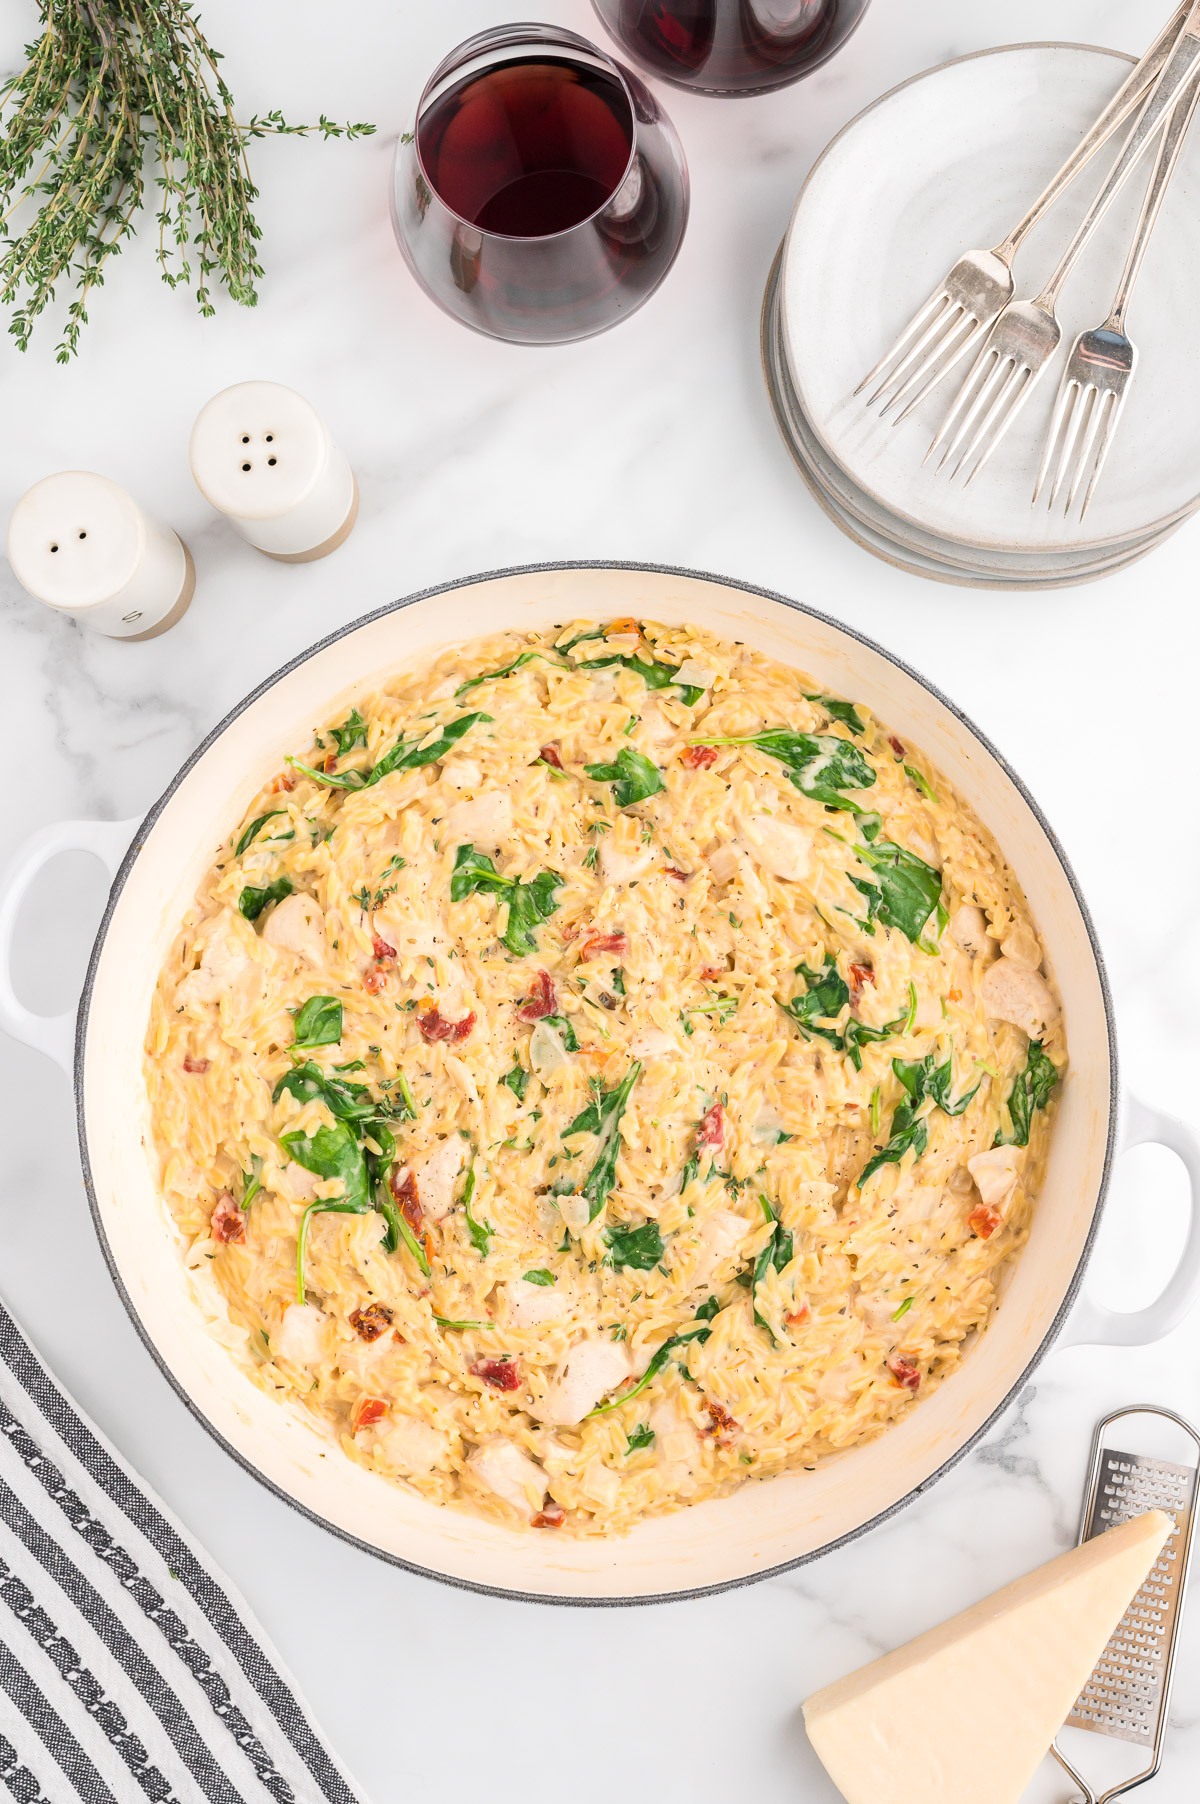 Creamy Parmesan orzo with fresh spinach and sundried tomatoes